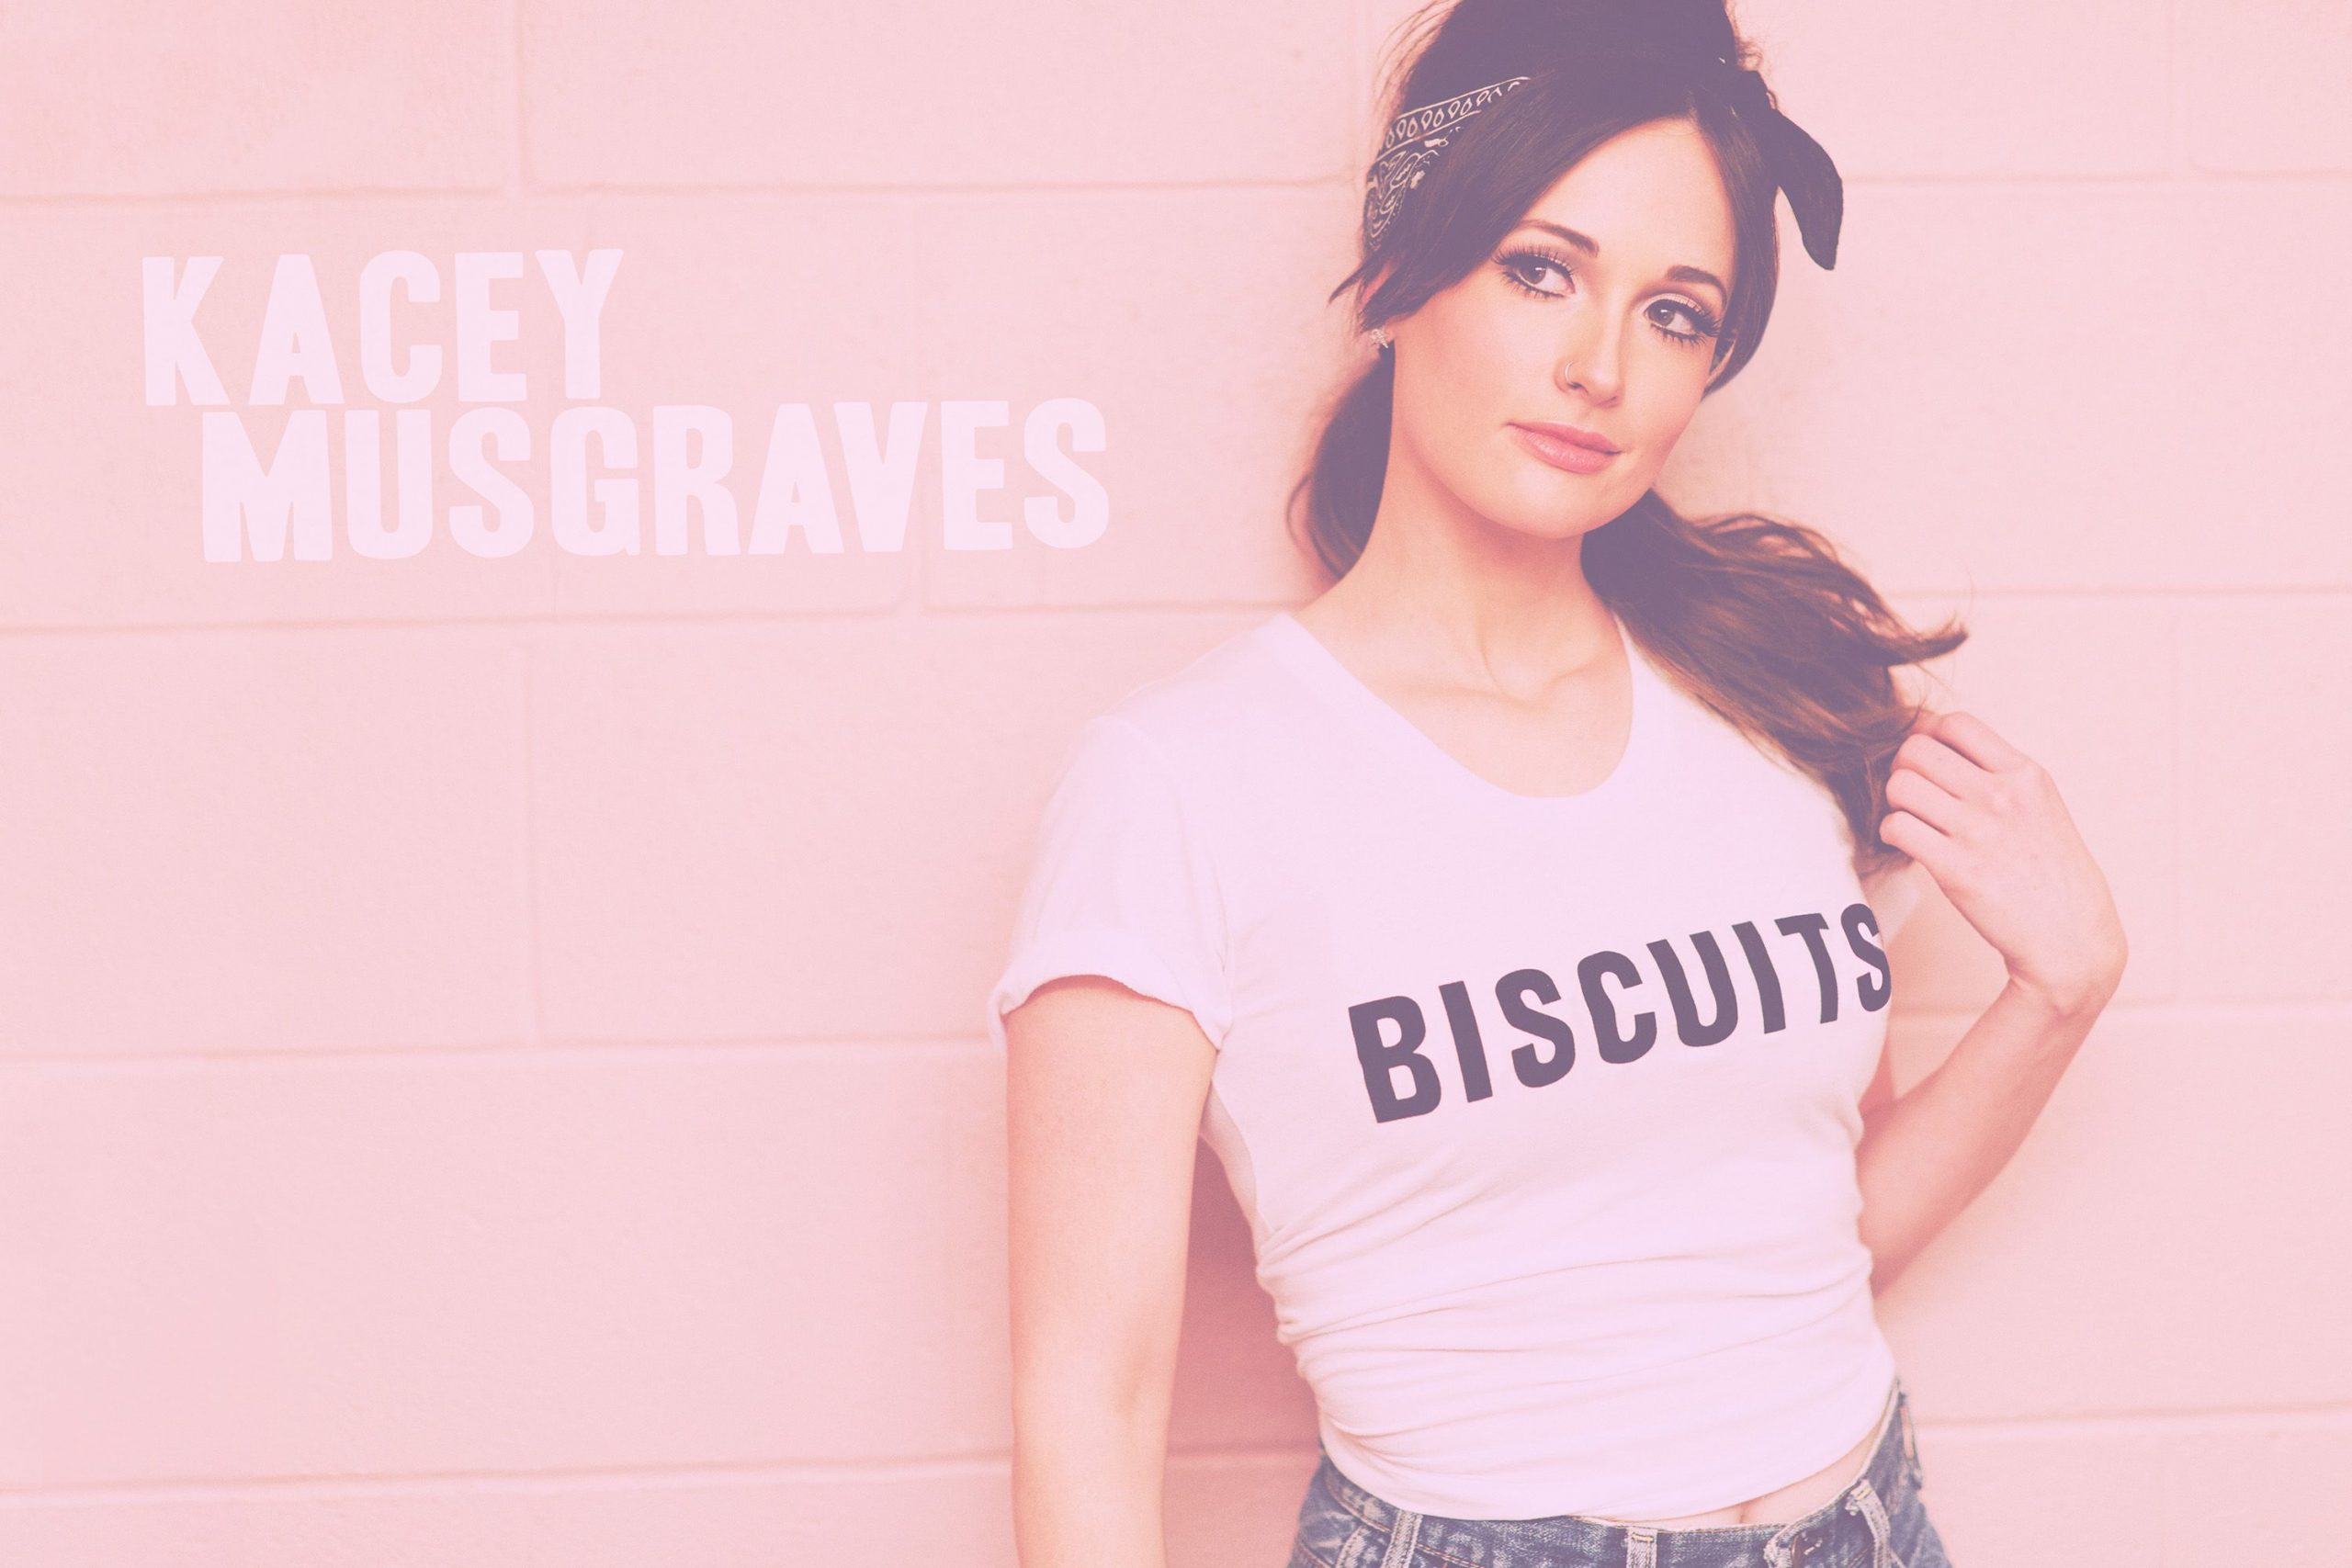 KACEY MUSGRAVES’ NEW SINGLE “BISCUITS”